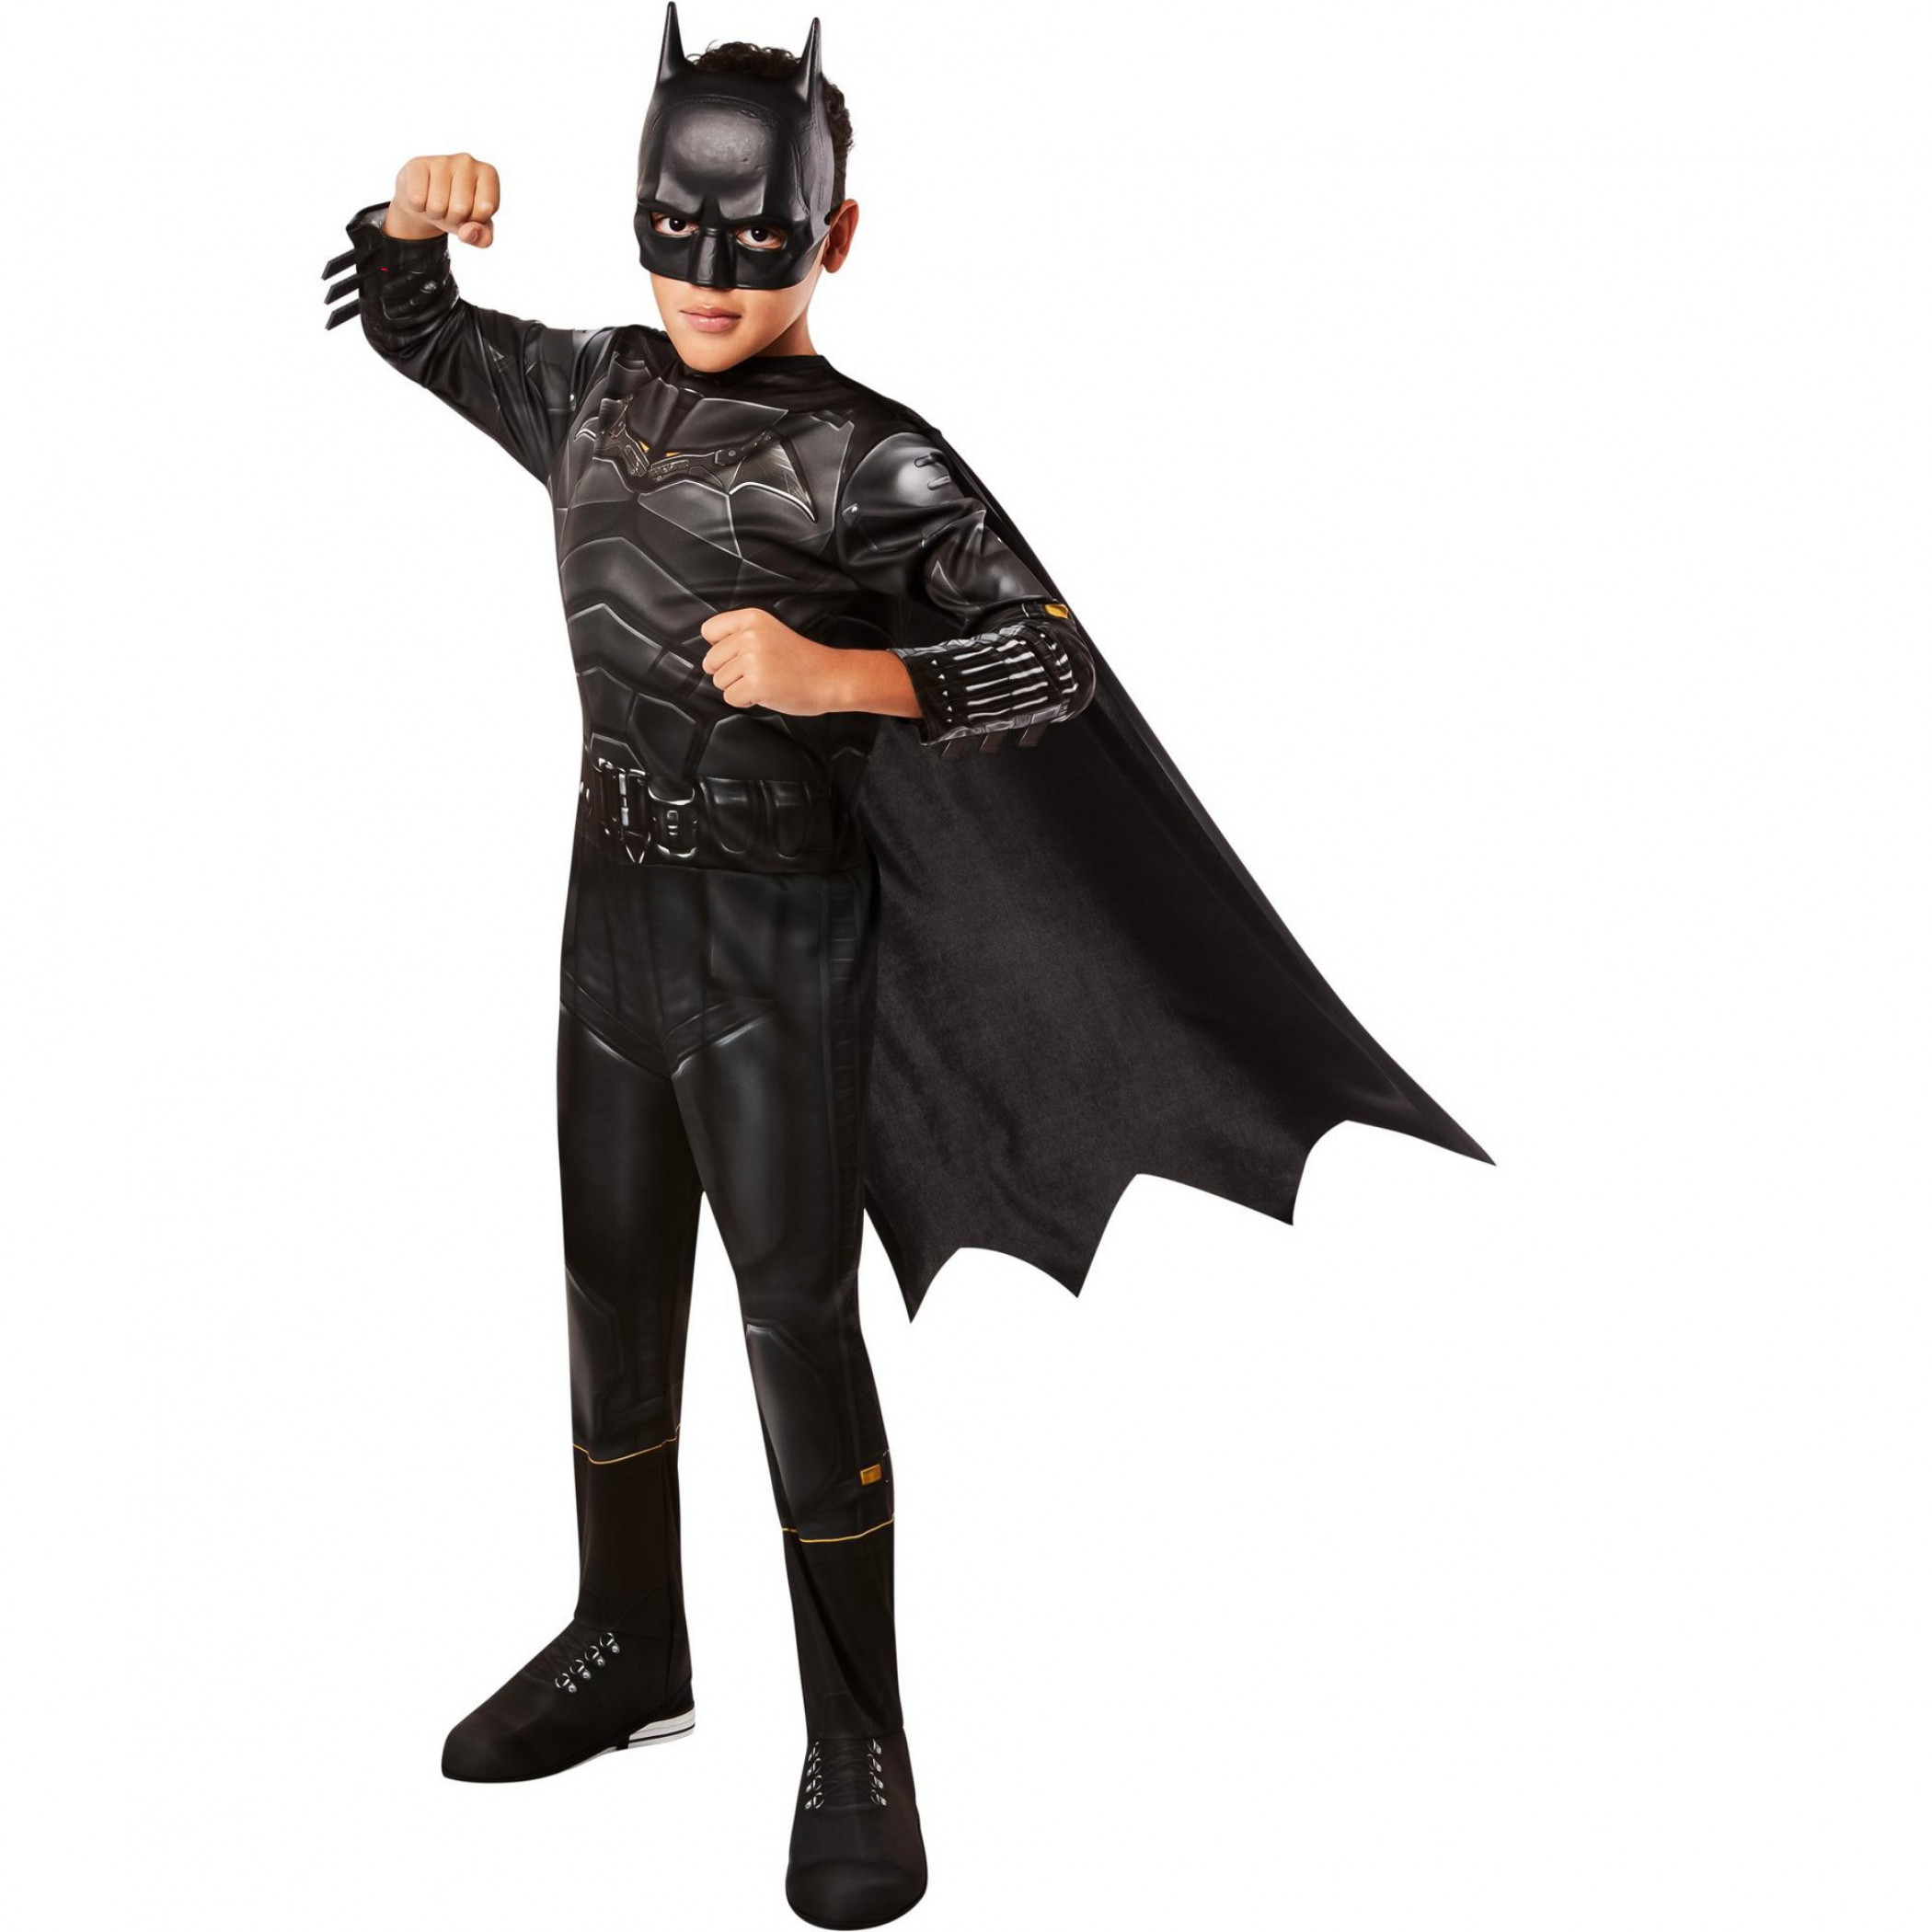 The Batman Movie Complete Youth Costume with Cape